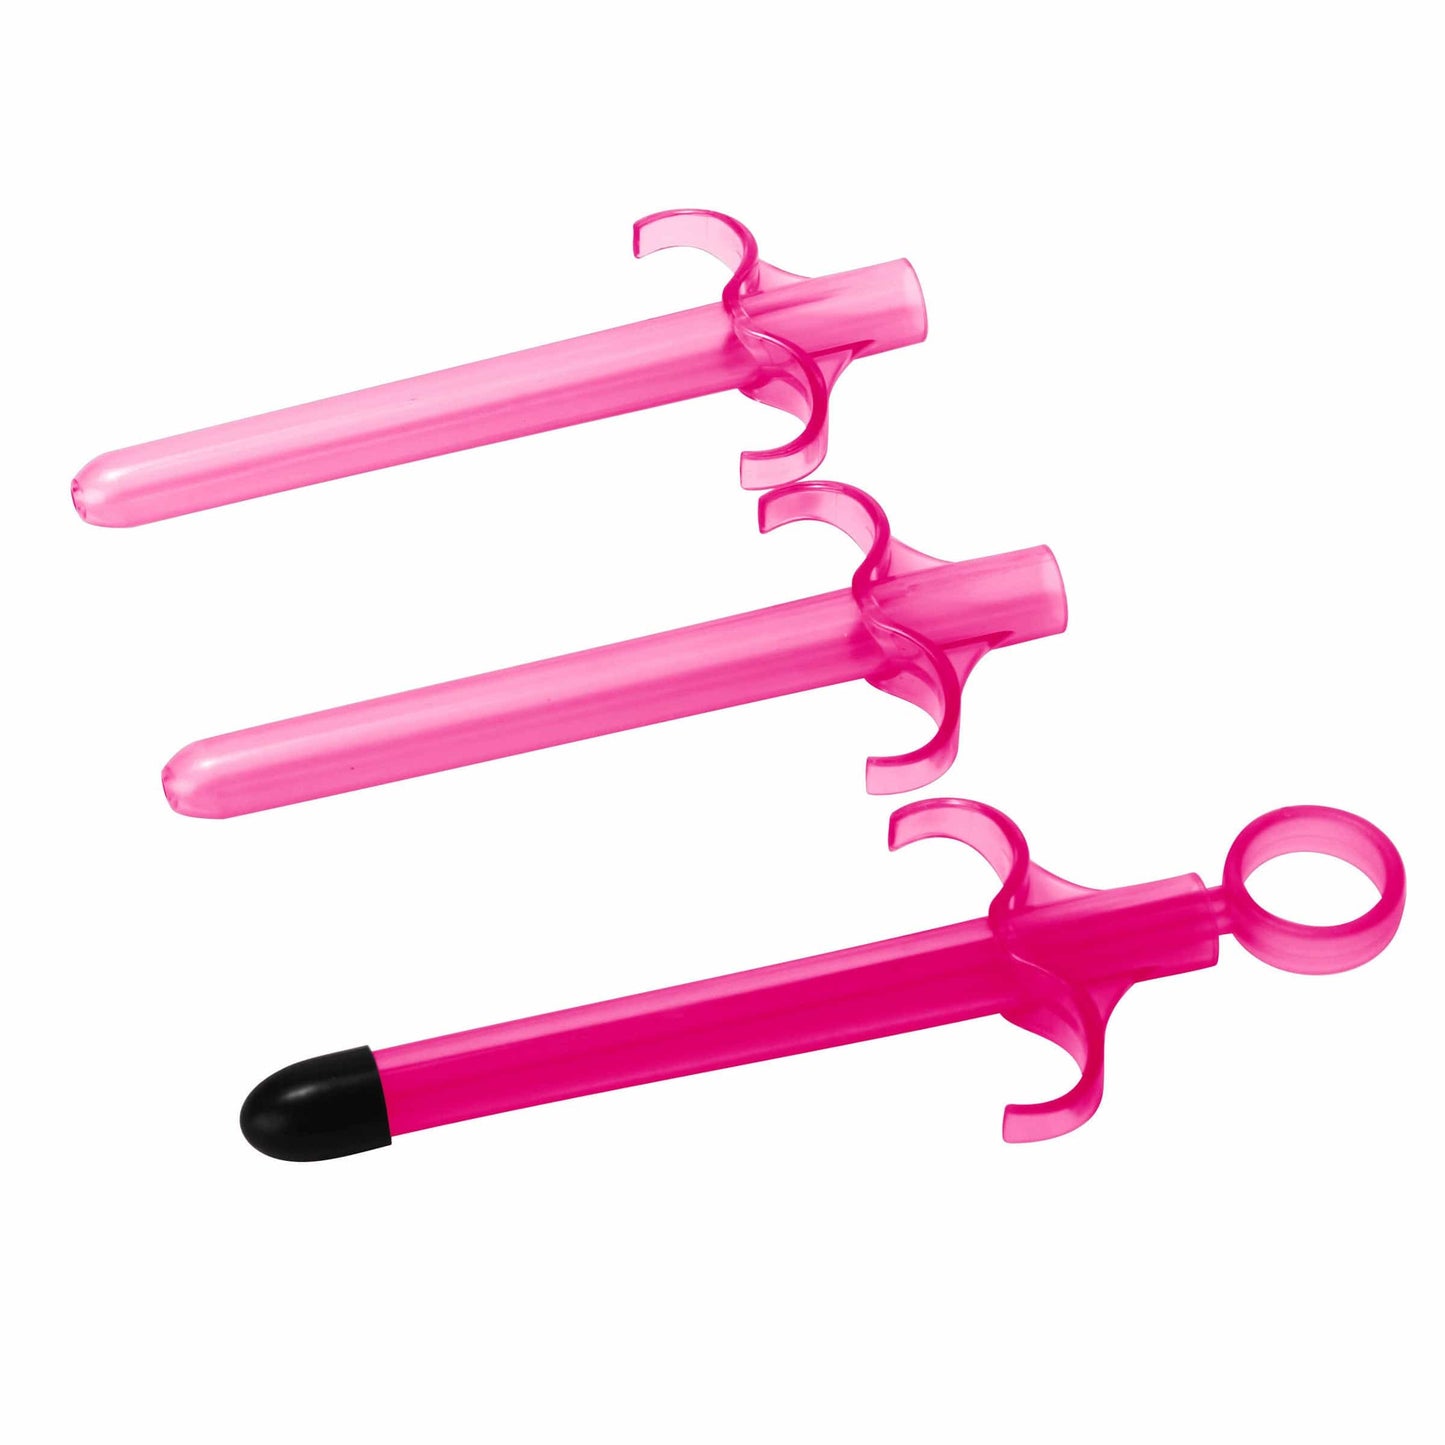 Trinity Vibes Lube Launcher Pink Lubricant Launcher 3 Pack at the Haus of Shag